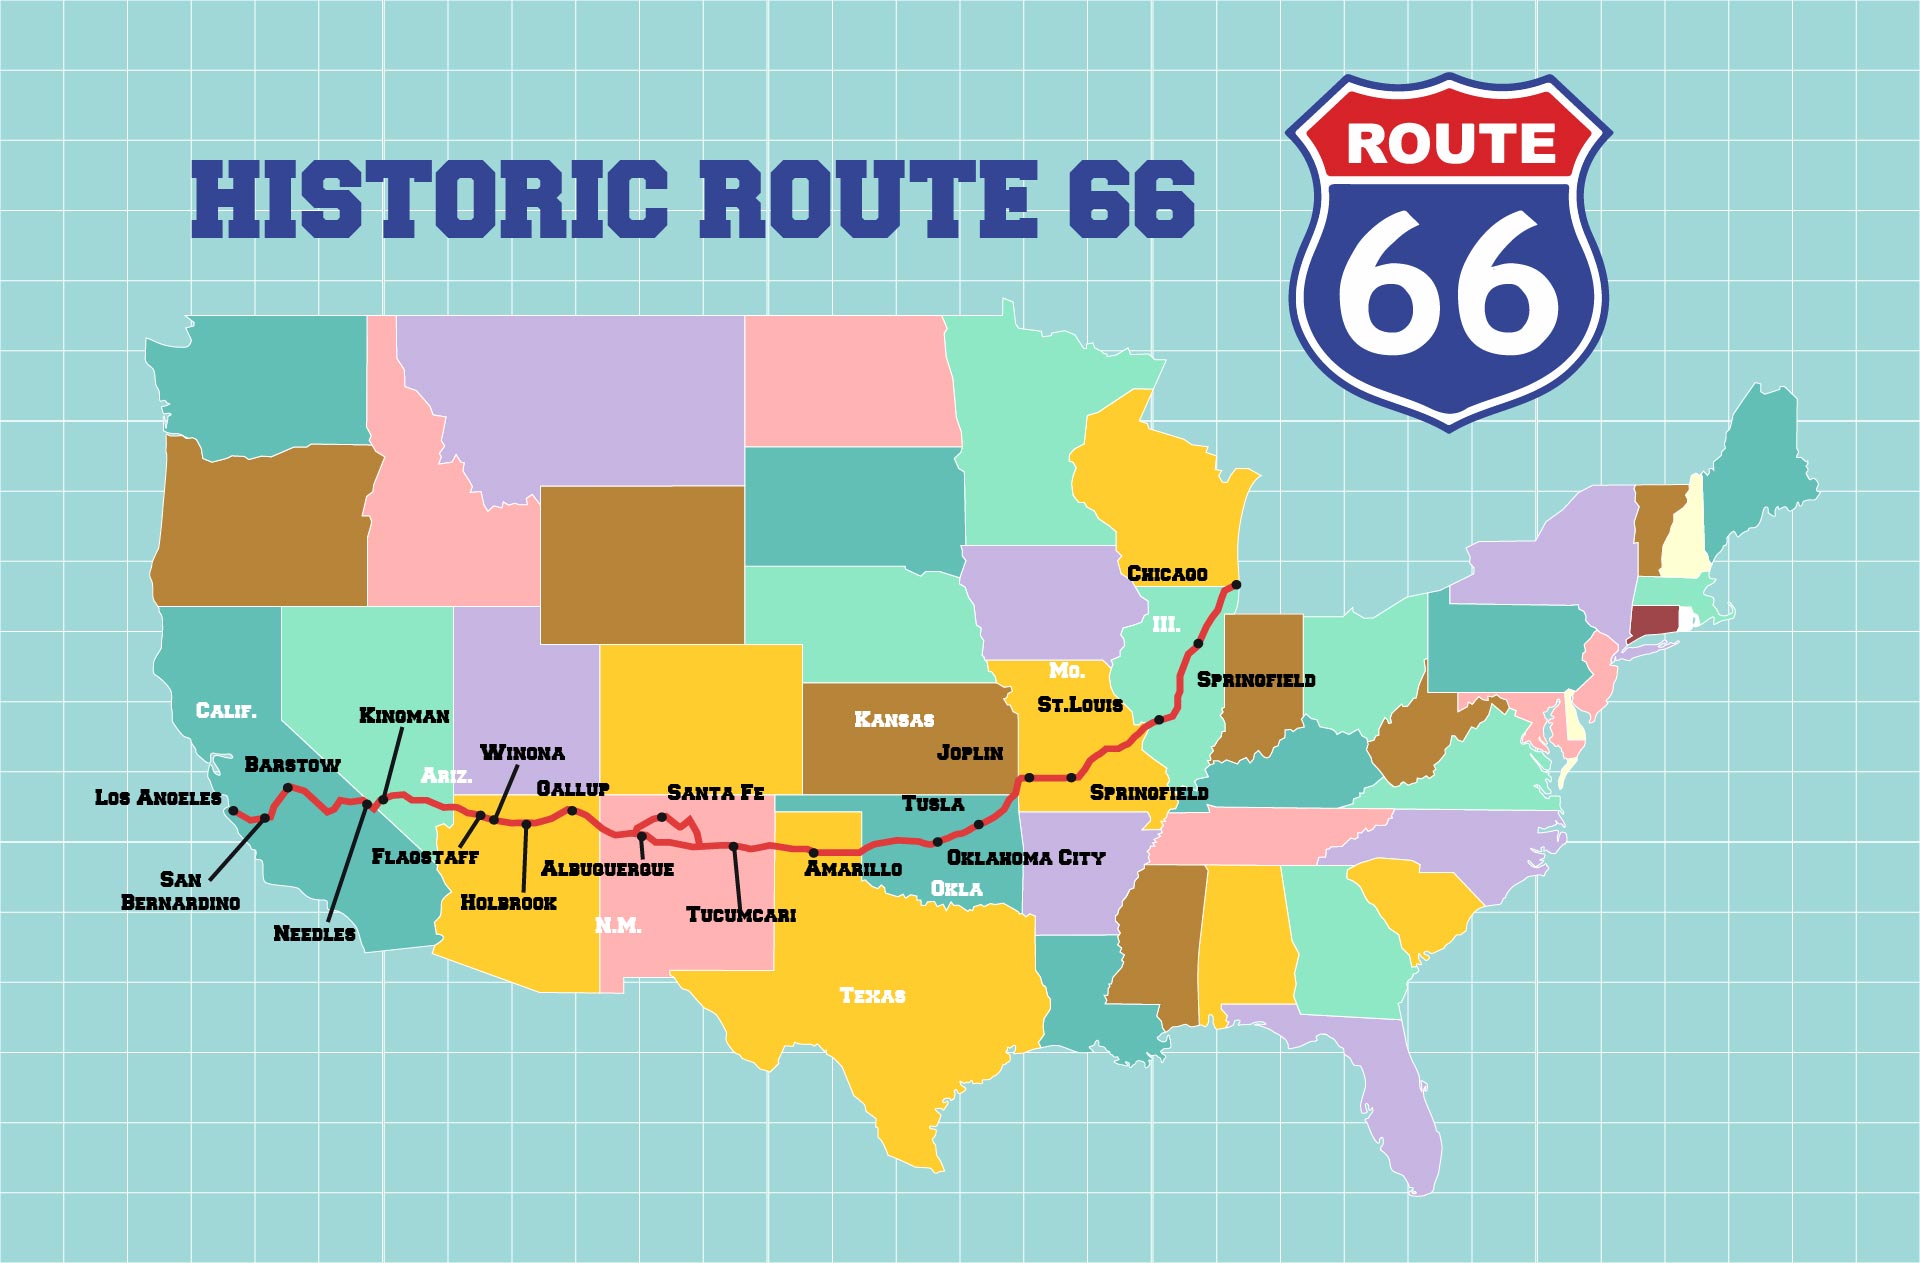 6 Best Images of Printable Route Maps - Printable Route 66 Map, United